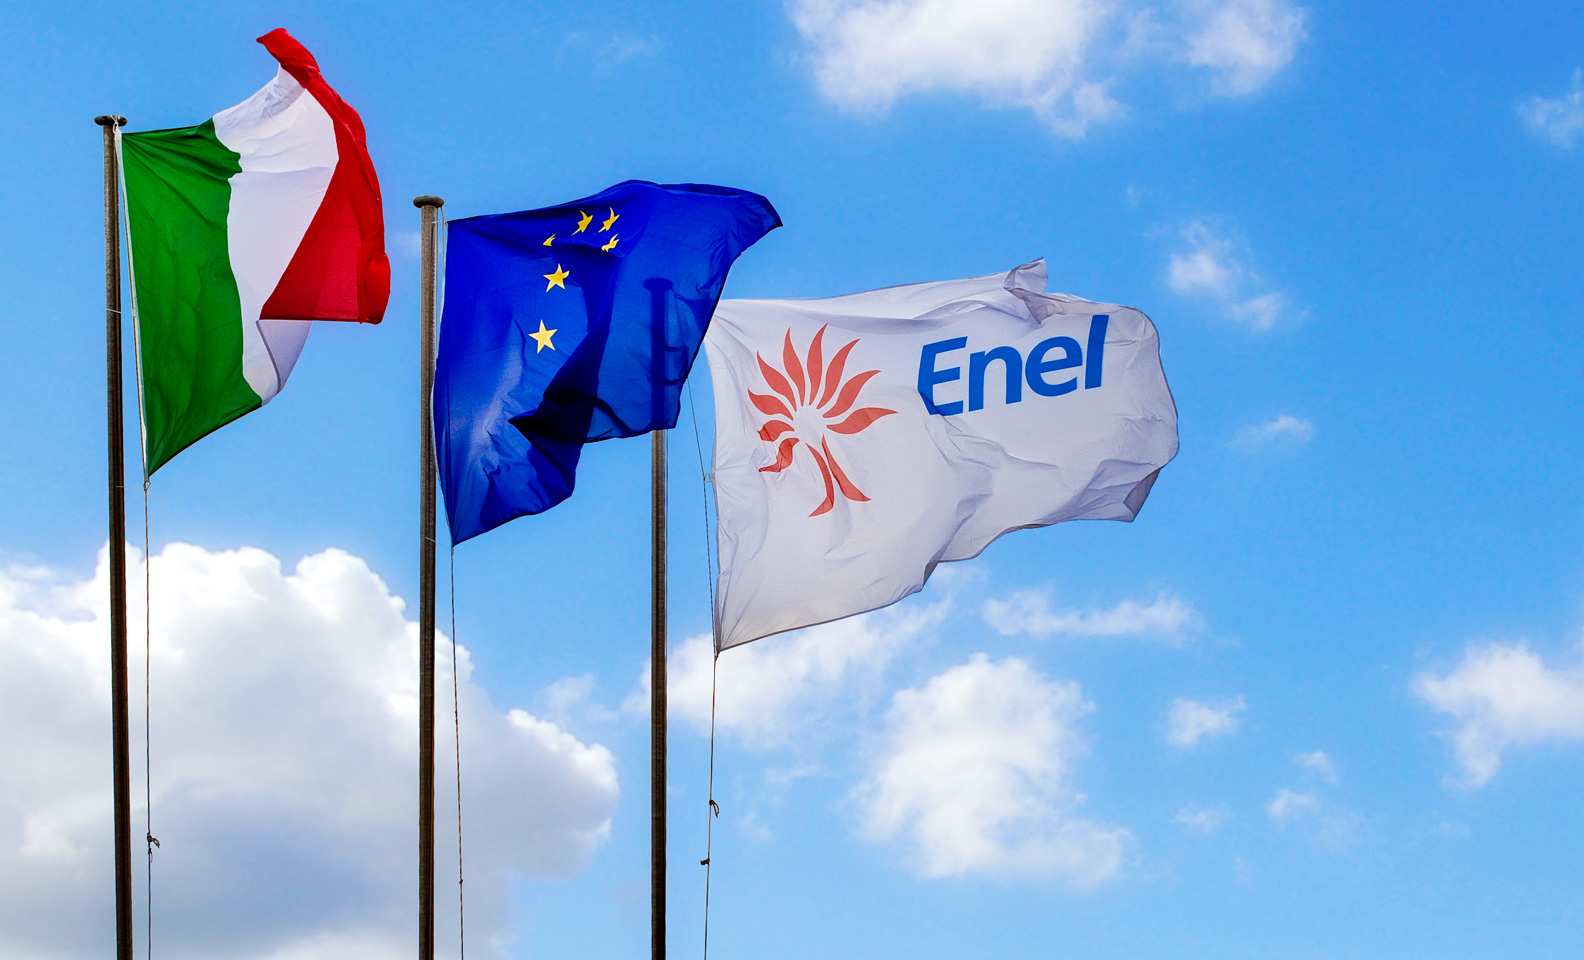 Enel is investing for clean, safe and efficient energy, the goals of the  Horizon 2020 program, Enel Group